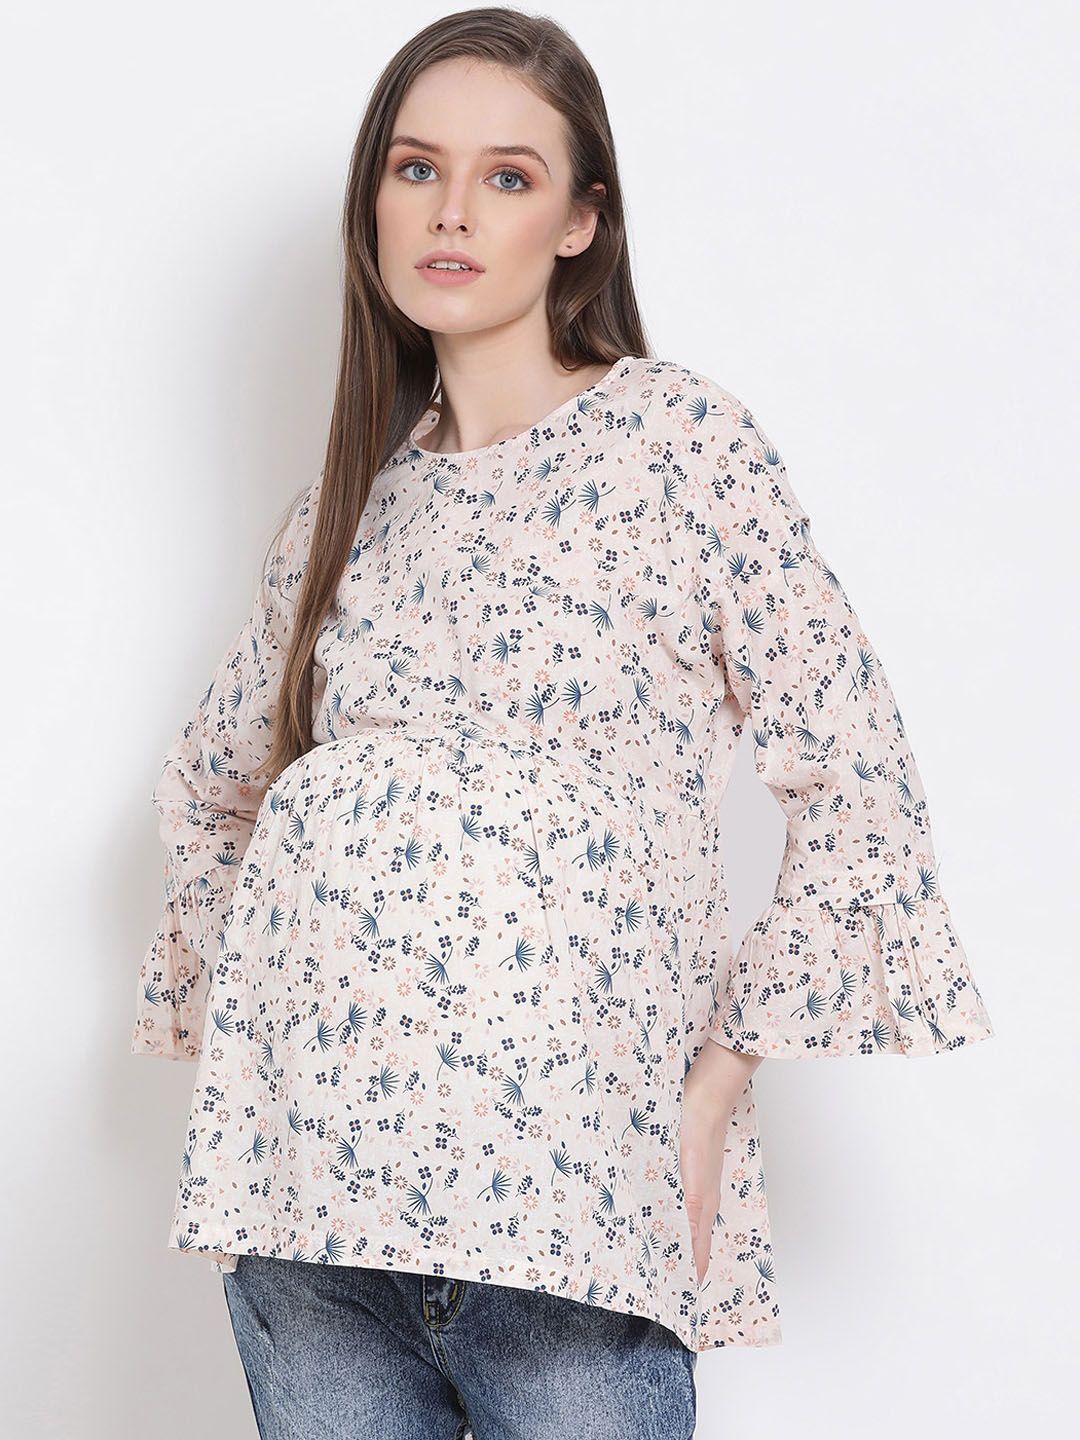 oxolloxo peach-coloured floral printed flared sleeves maternity top